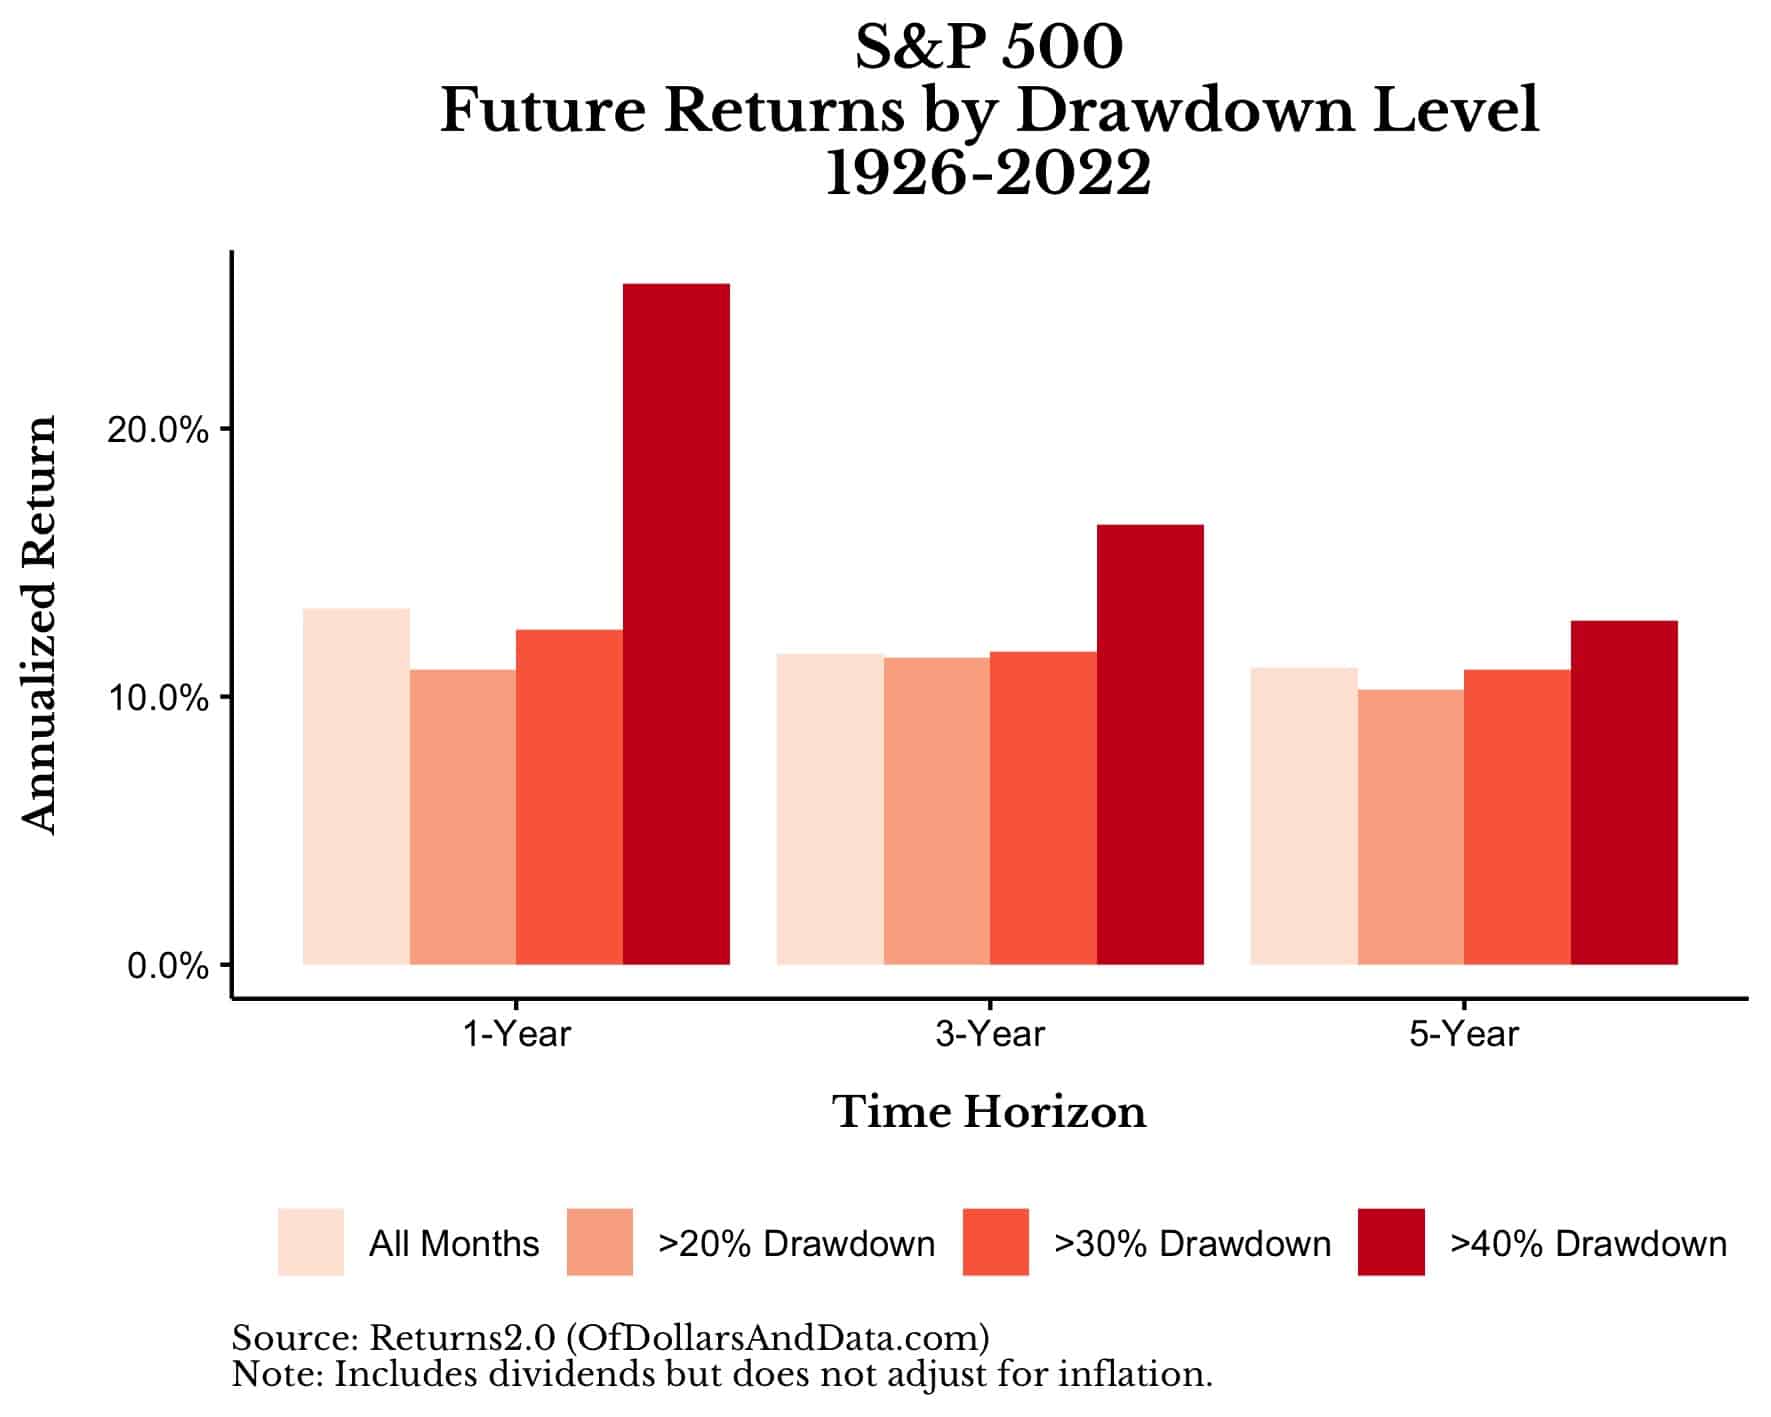 S&P 500 future returns by drawdown level from 1926-2022